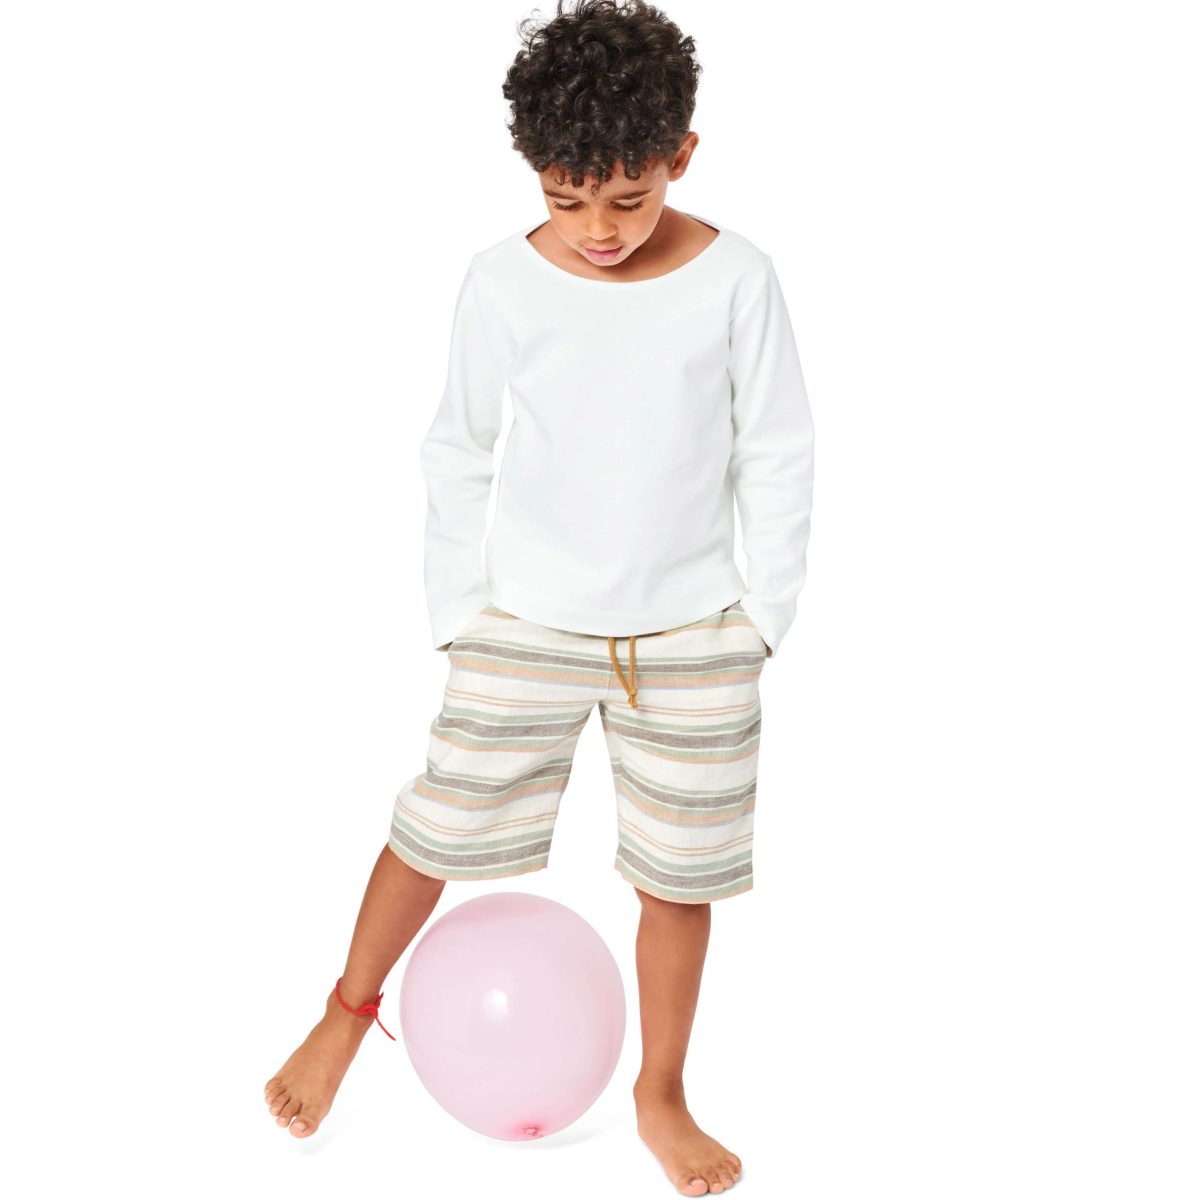 Burda Style Pattern 9261 Children's Trousers and Top